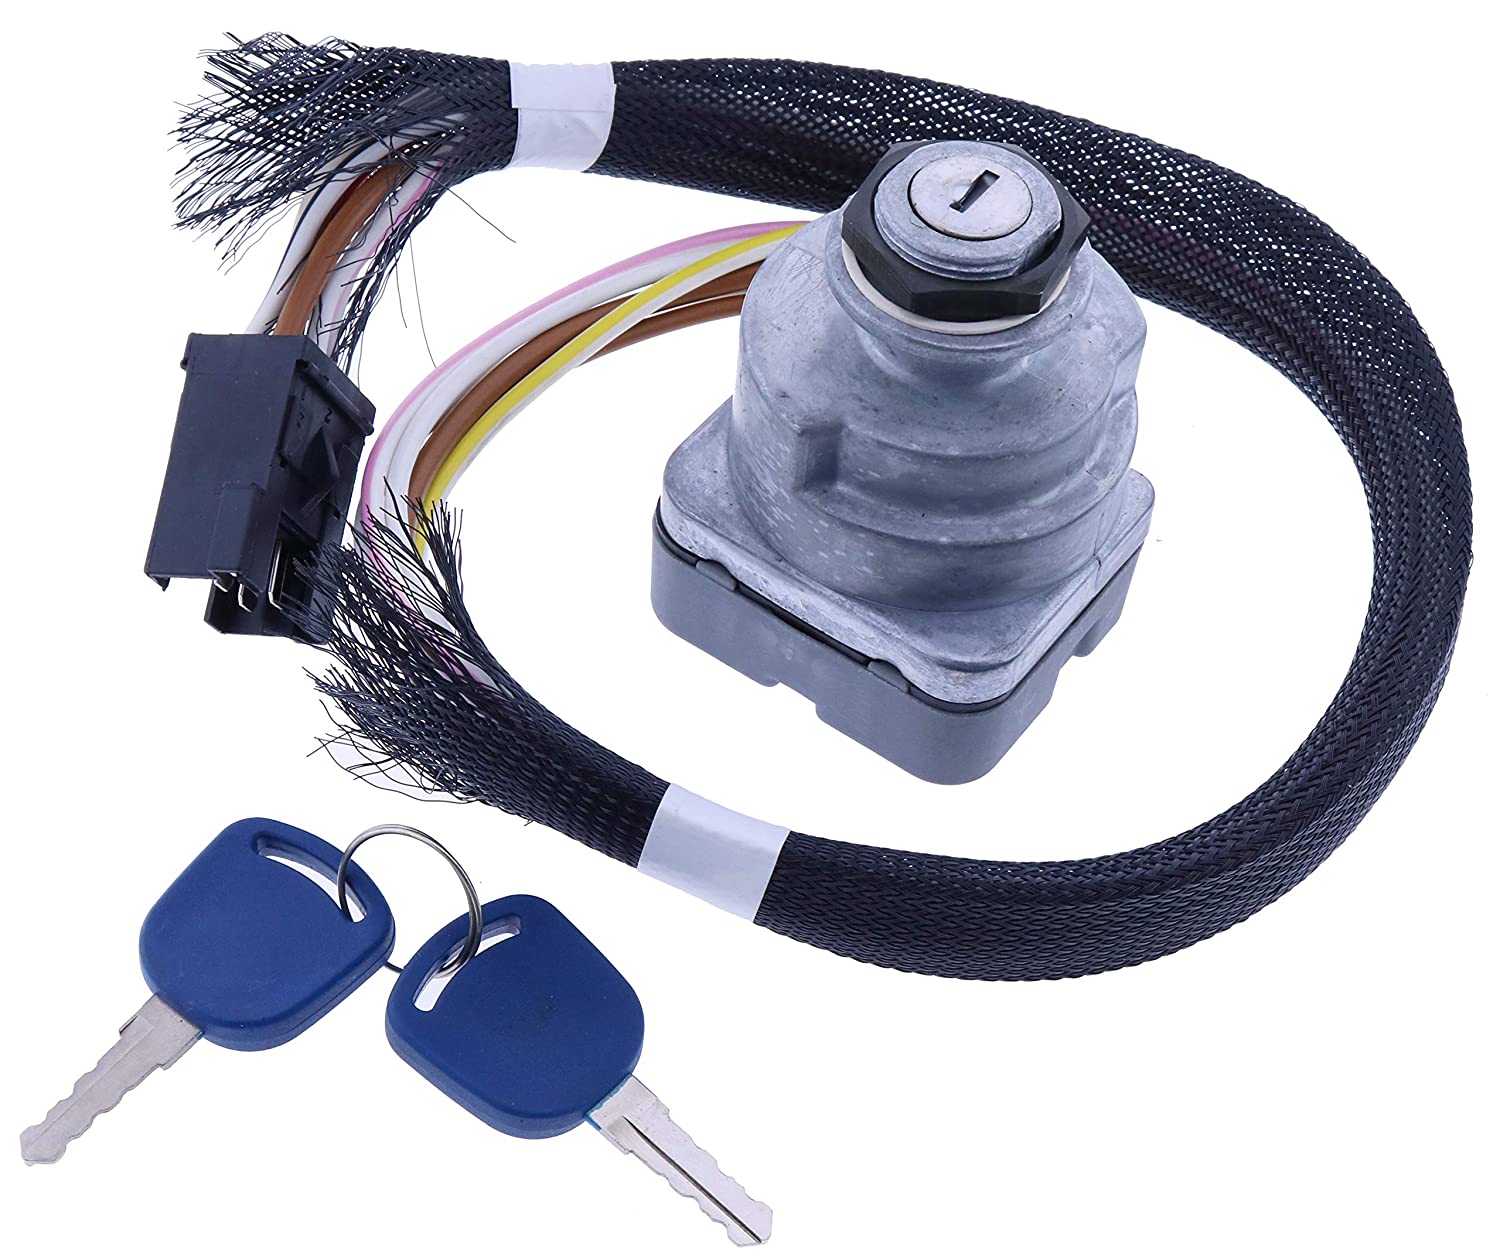 Ignition Switch 81864288 F0NN11N501AA 1100-0962 for New Holland TS100 TS110 TS115 TS125A TS130A TS135A TS6000 TS6020 TS6030 TS90 Case IH Ford 6640 5640 8340 7840 7740 8260 8360 8560+ Series - KUDUPARTS